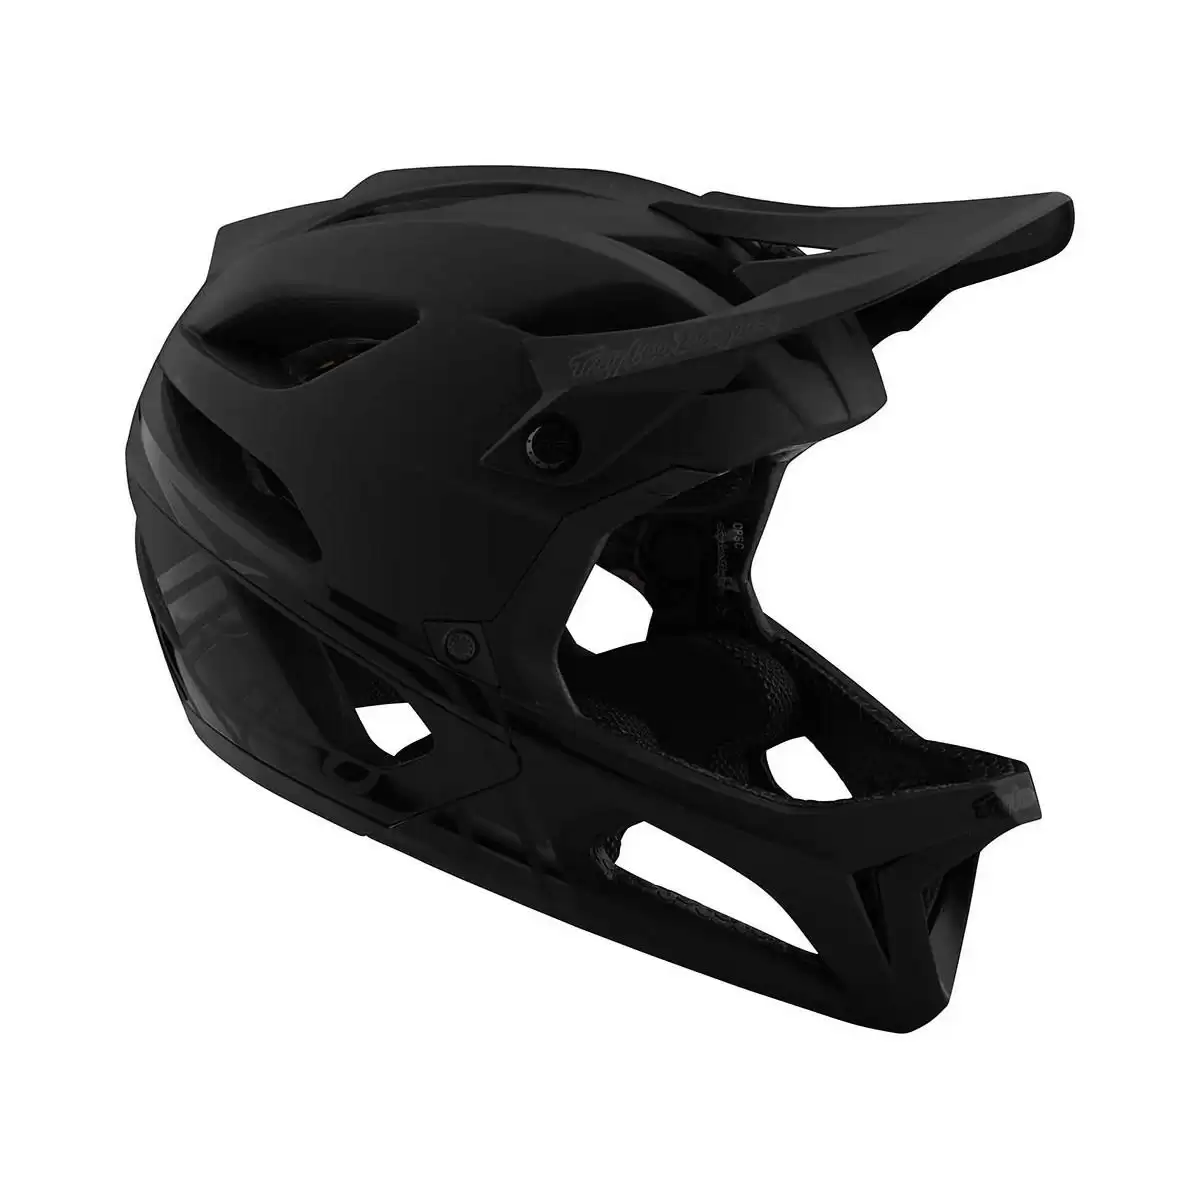 Full Face Helmet Stage MIPS Stealth Midnight Black Size M/L (57-59cm) #1